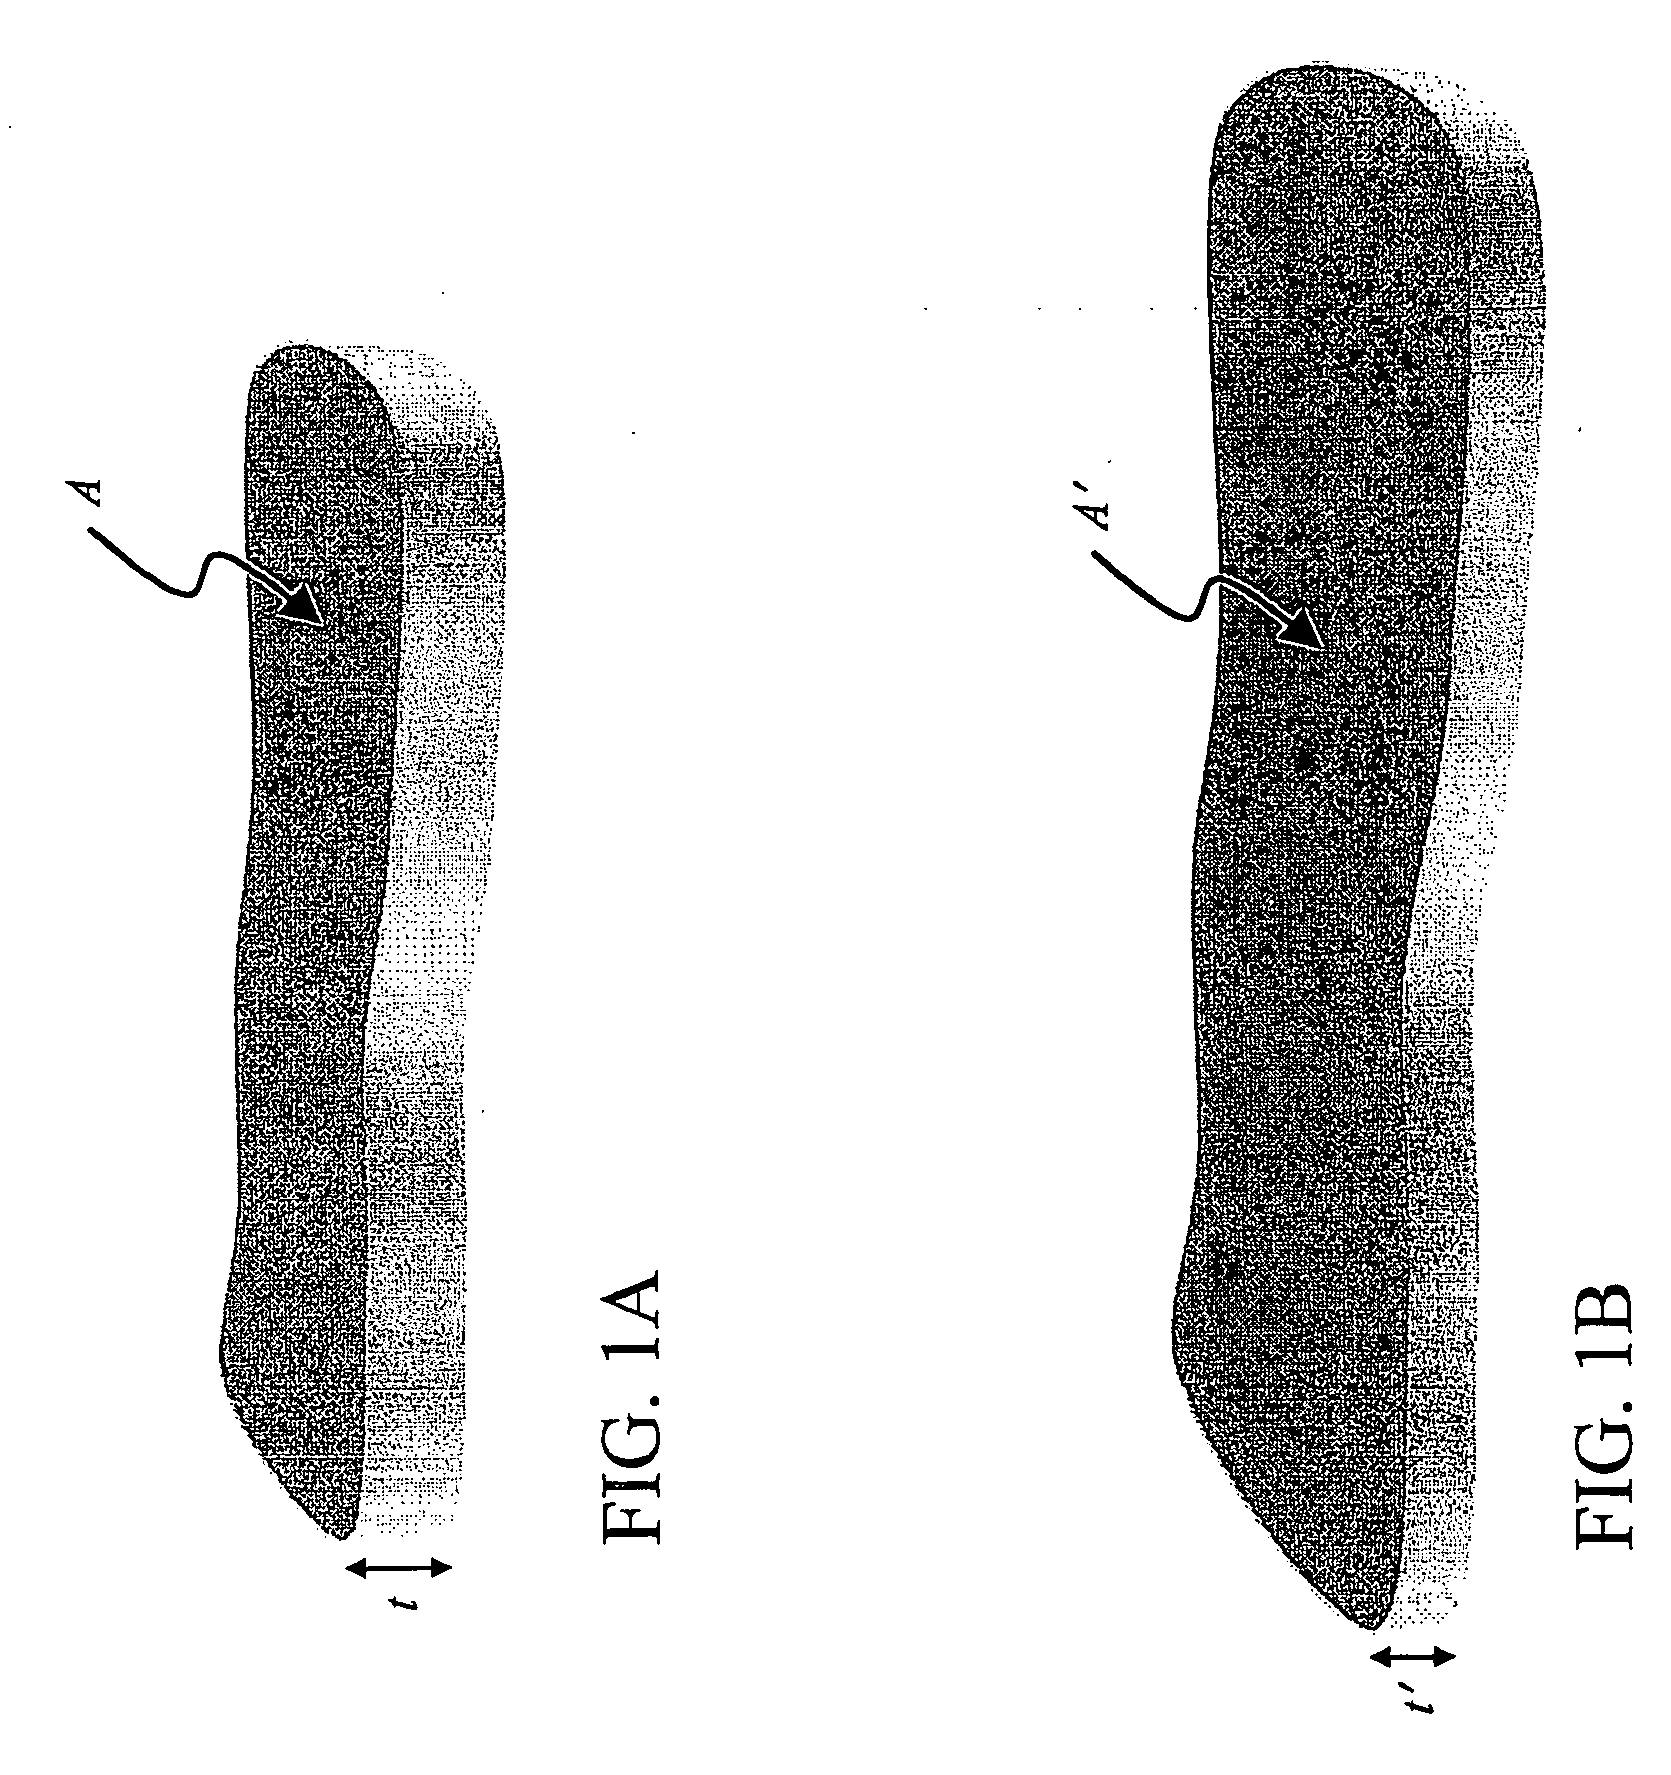 System and method for treating tissue